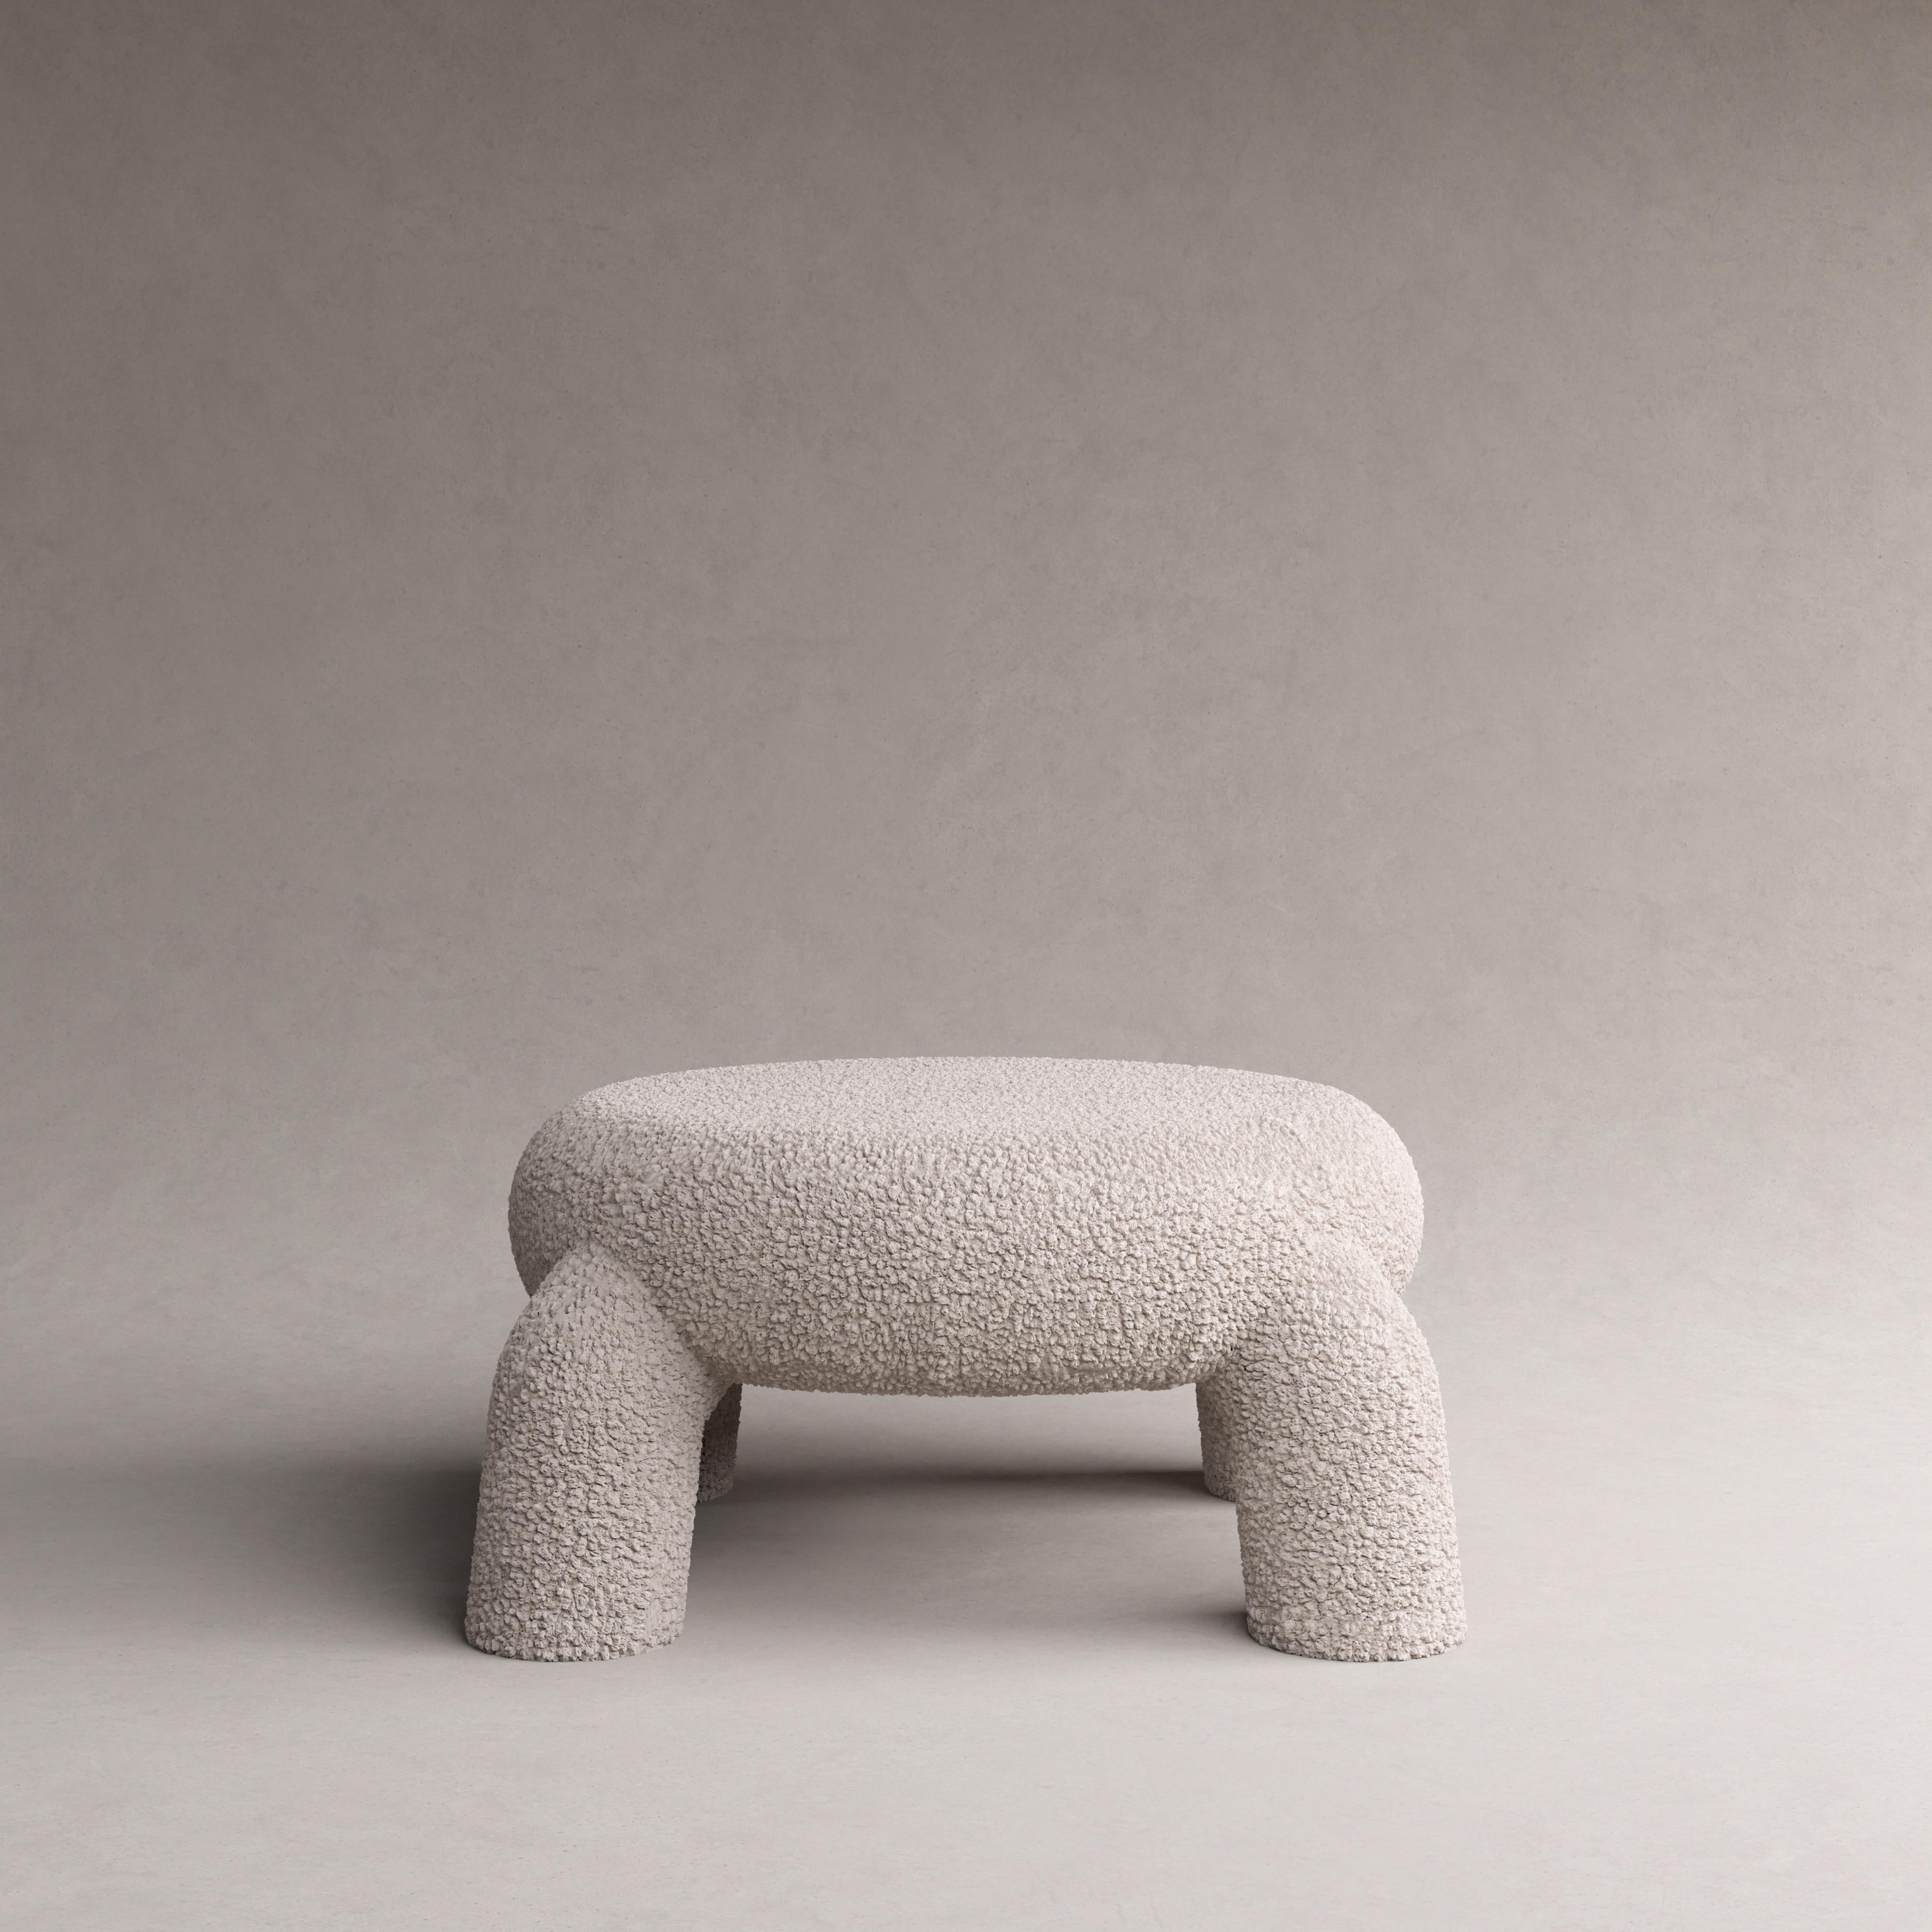 Khelone ottoman by Pietro Franceschini
Sold exclusively by Galerie Philia
Manufacturer : Stefano Minotti
Dimensions: W 79 x H 42 cm
Materials: Lamb.

Available in Bouclé

Pietro Franceschini is an architect and designer based in New York and